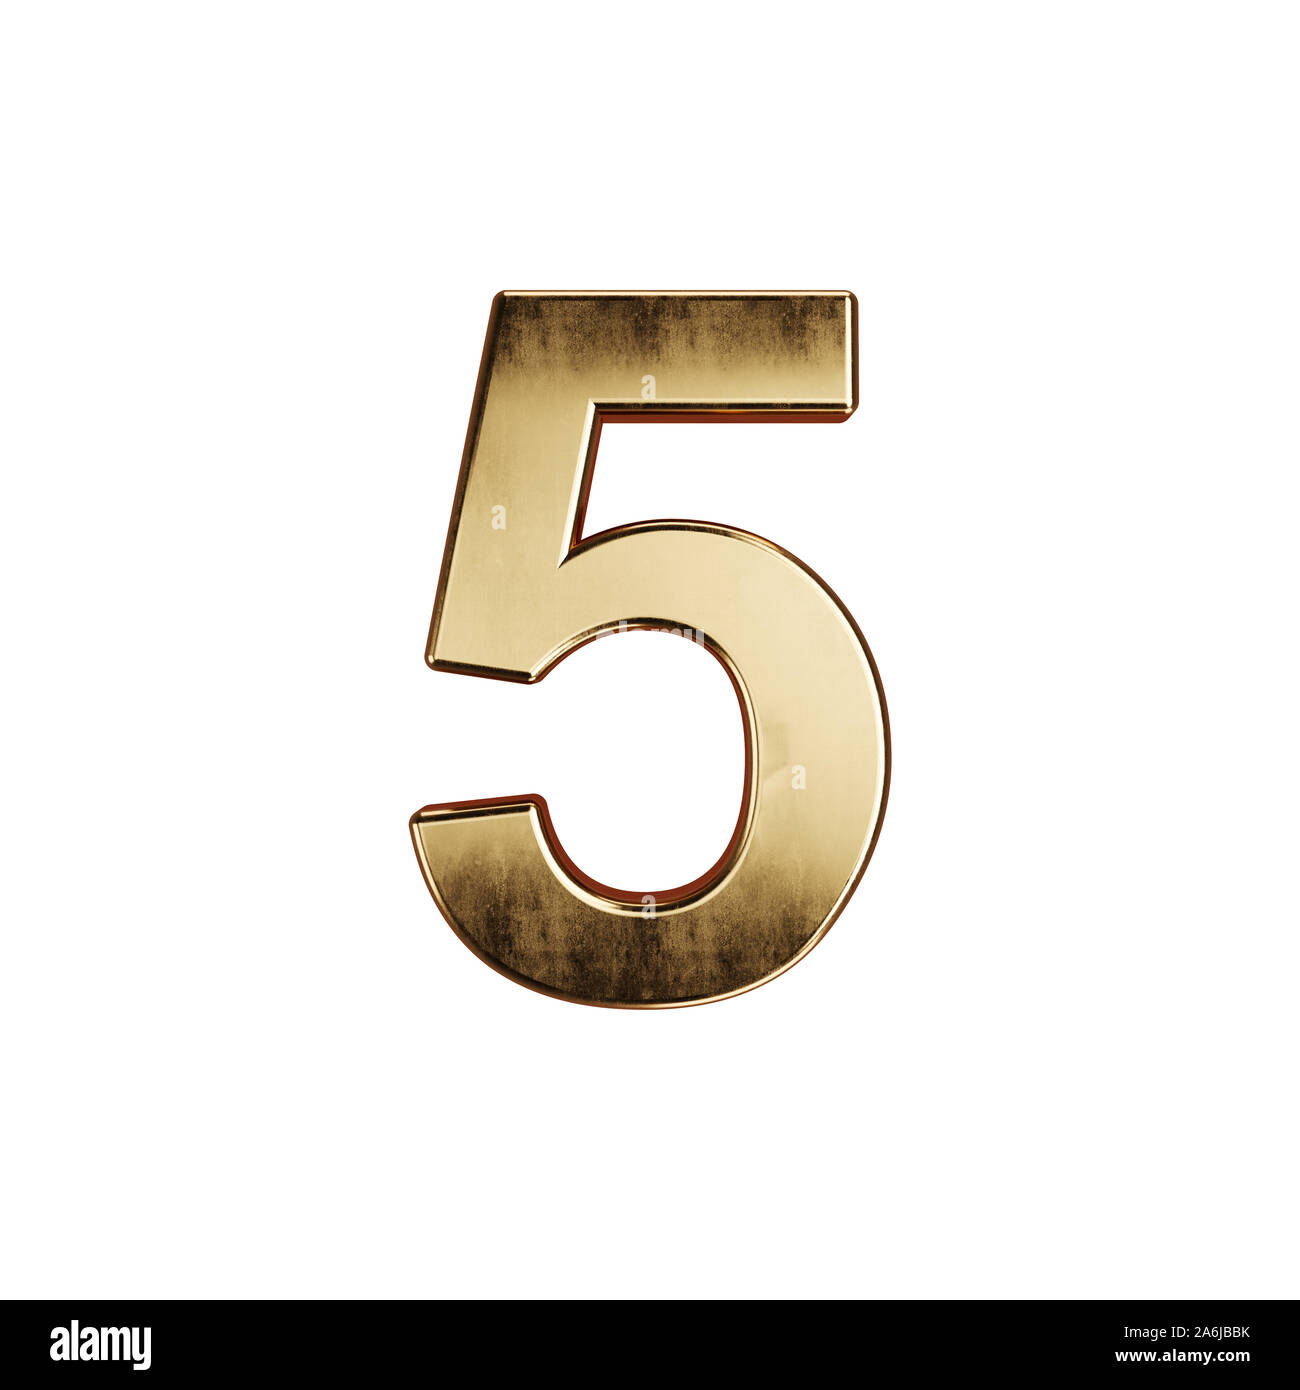 3d render of golden digit alphabet character font number five simbol - 5. Isolated on white background Stock Photo